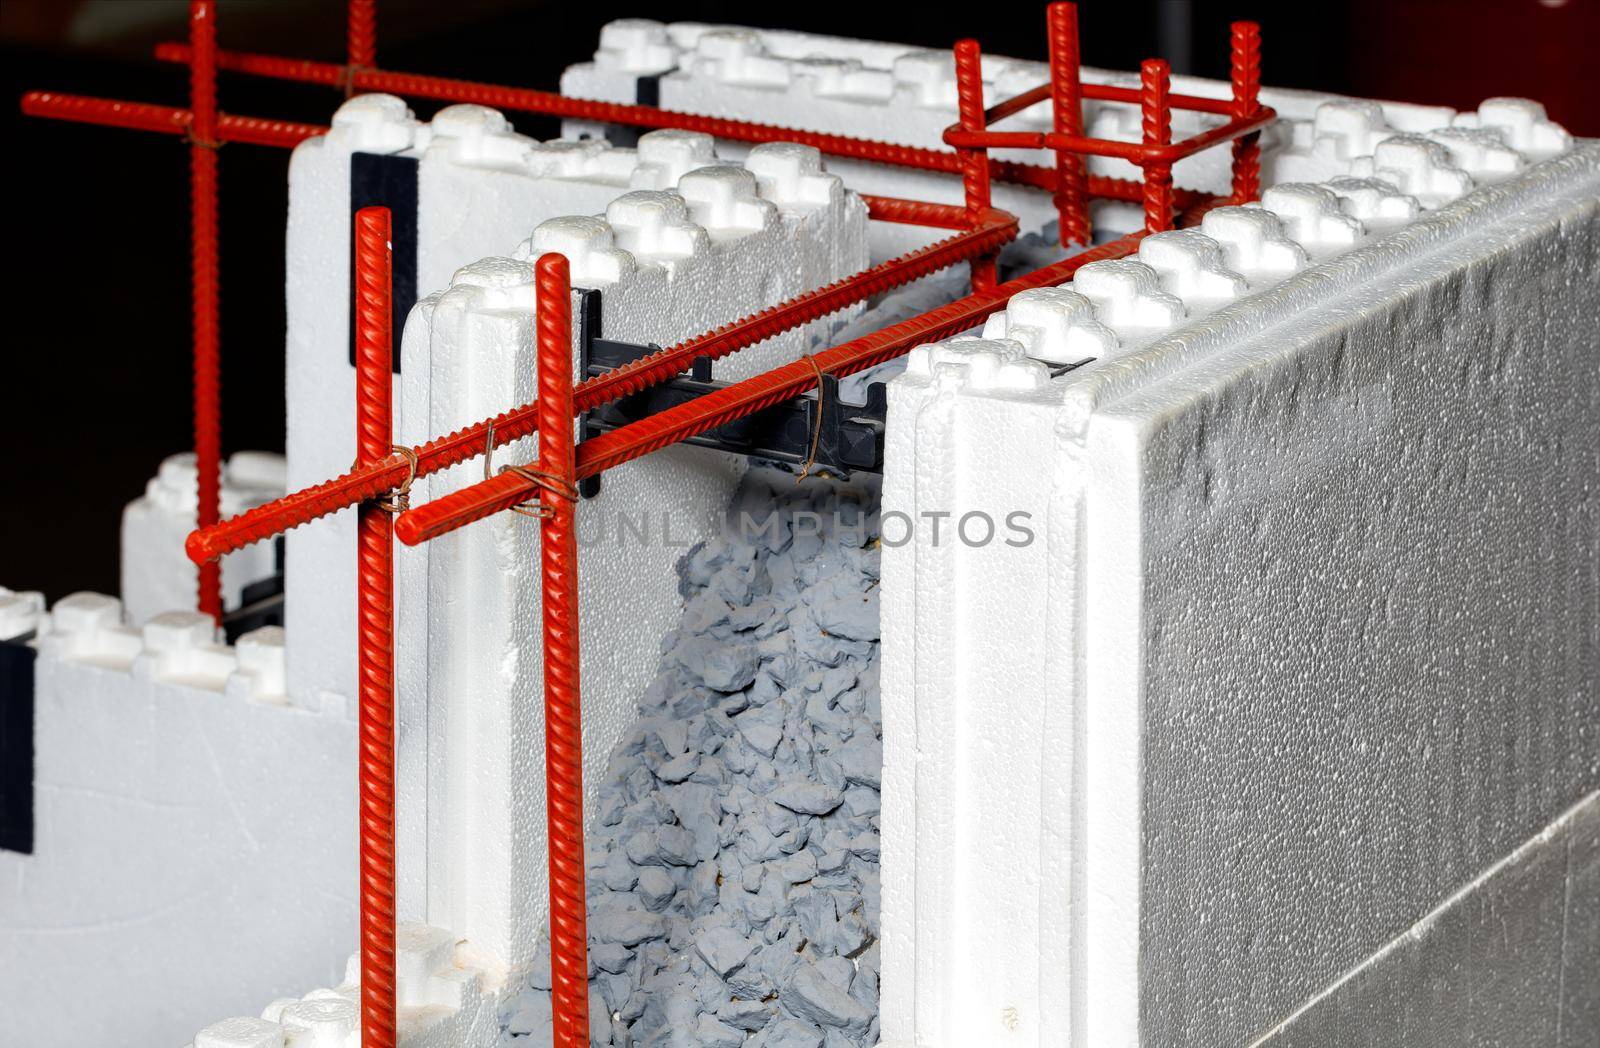 The diagram shows the use of metal reinforcement in conjunction with concrete in construction when laying and erecting walls of a building made of polystyrene and polyurethane foam. Concept and new technologies in the construction industry.